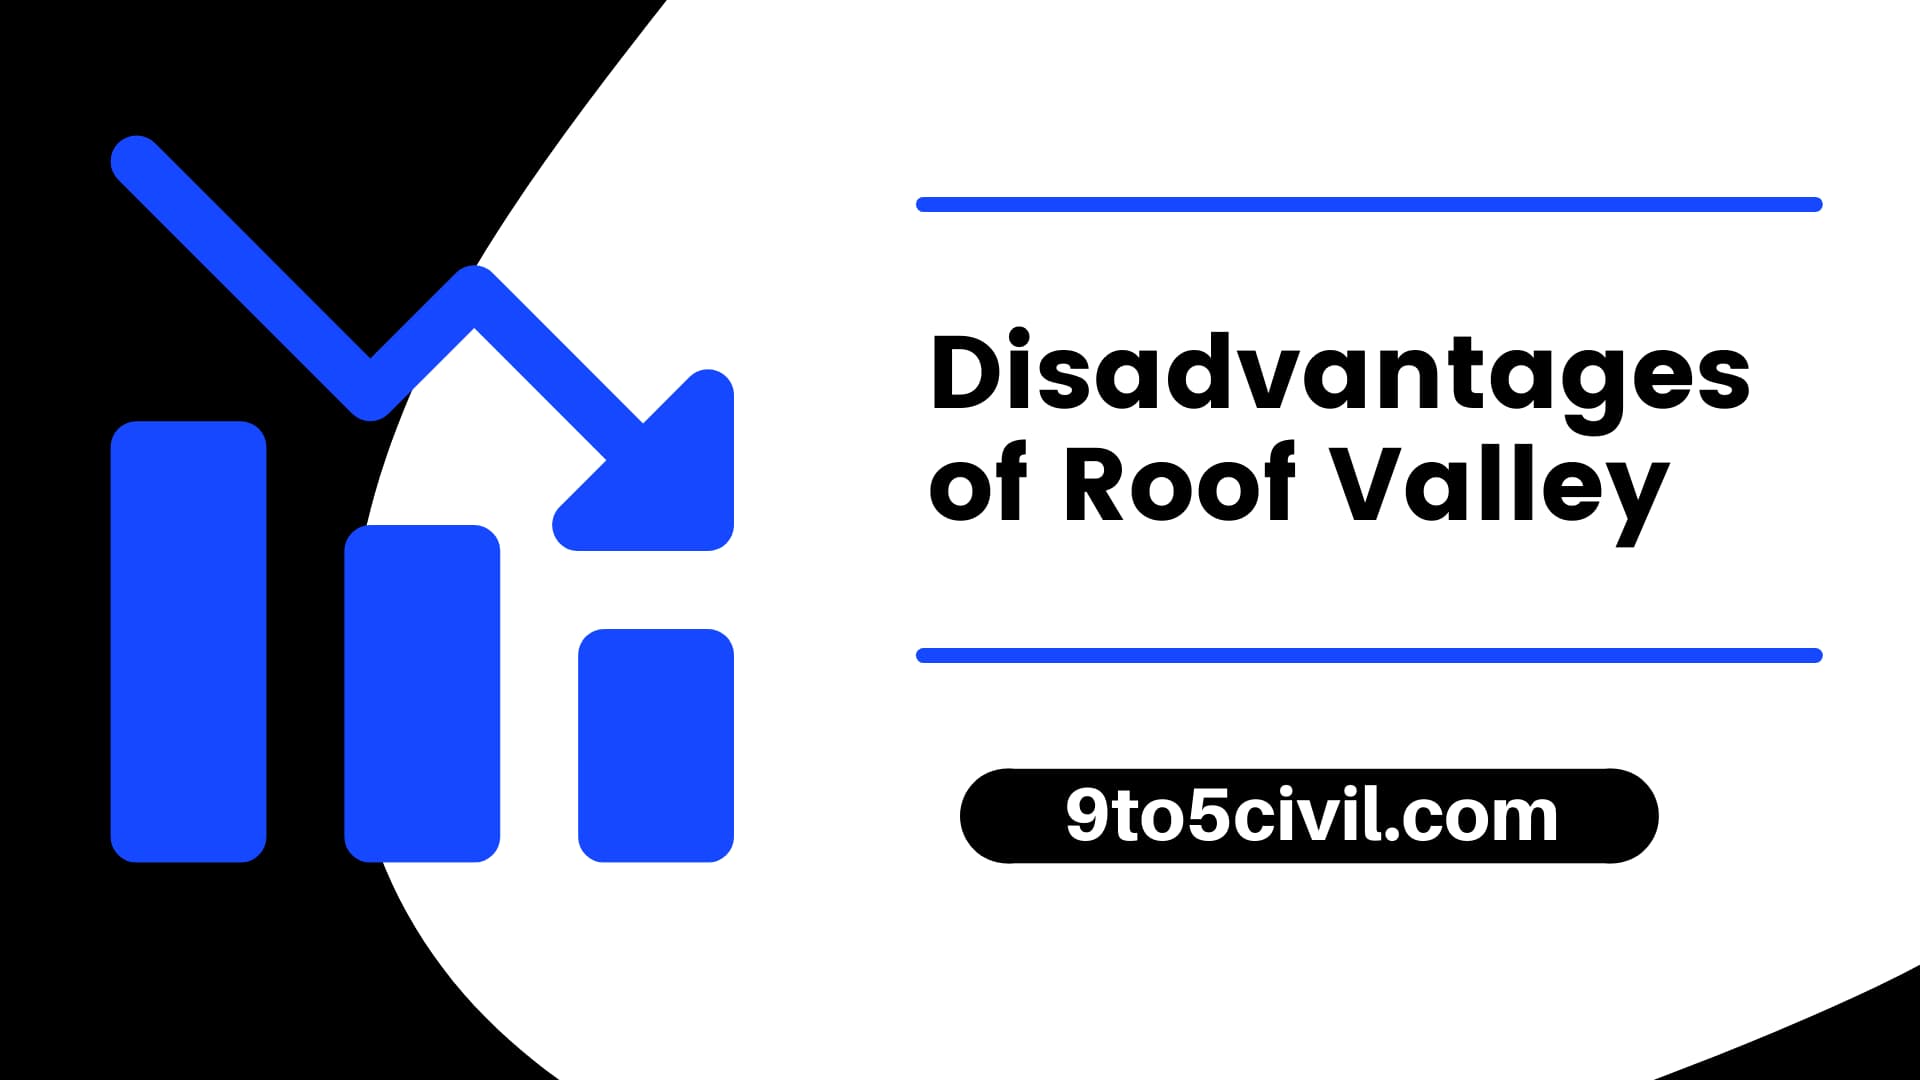 Disadvantages of Roof Valley